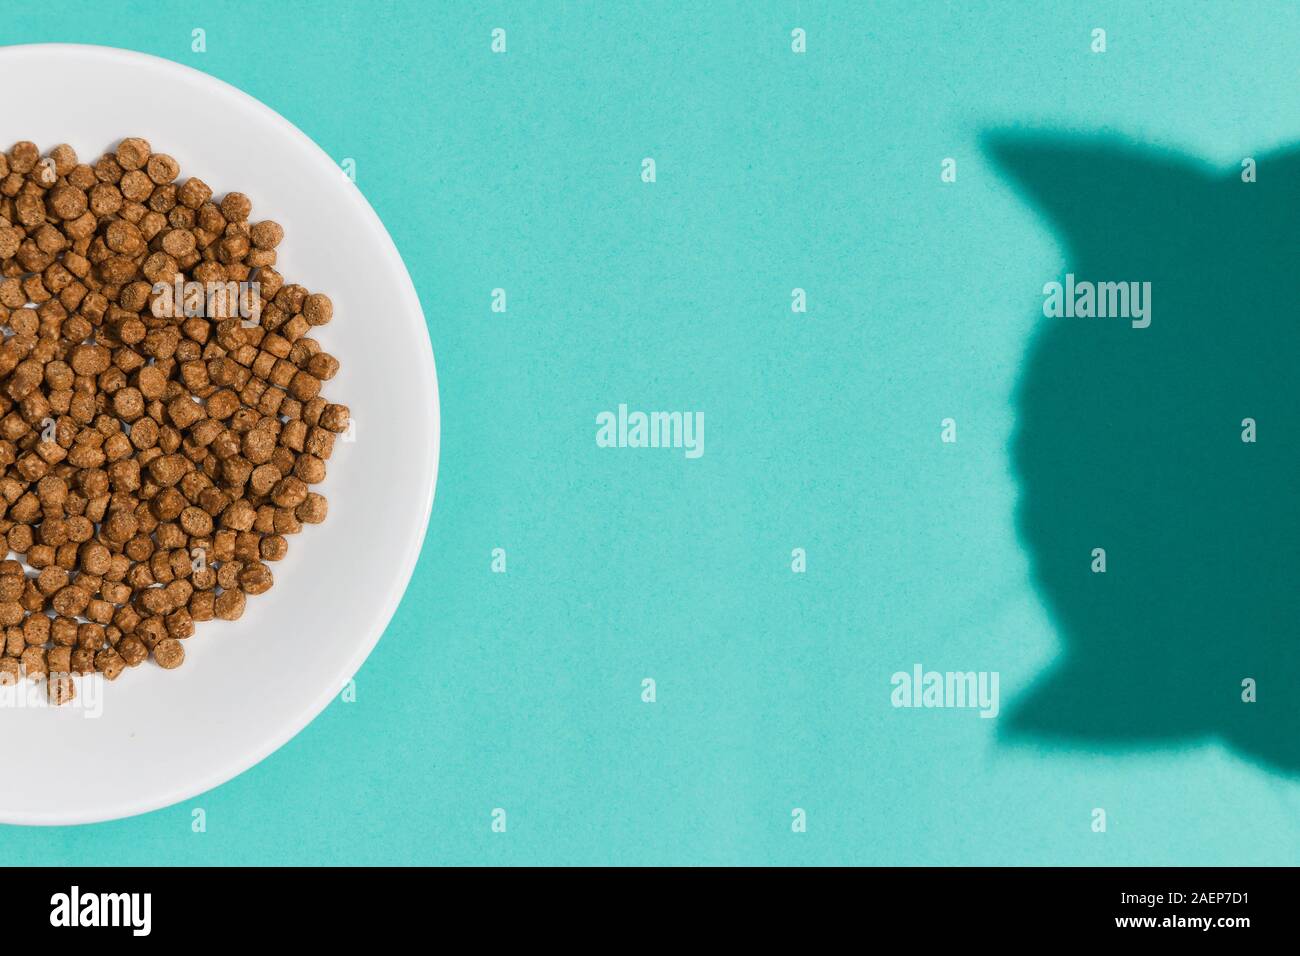 Plate with dry cat food and curious cat shadow on blue background. Direct light. Top view. Flat lay mockup. Stock Photo